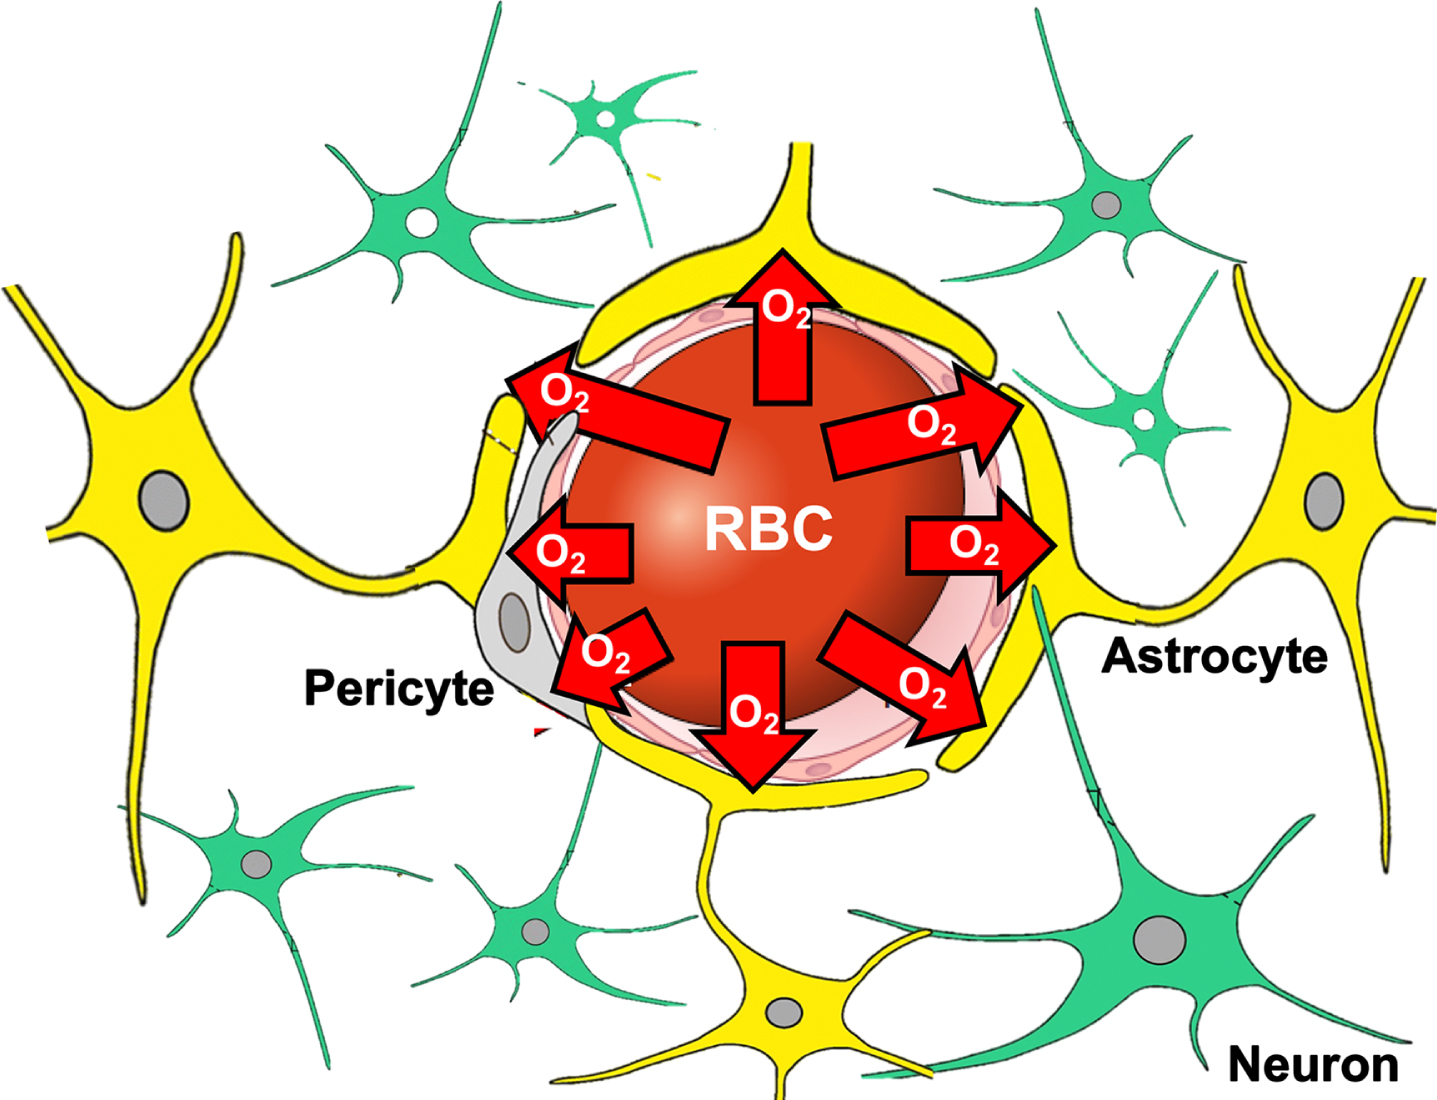 Geometry of oxygen (O2) diffusion from red blood cell (RBC) in brain capillary to neurons, astrocytes and pericytes. Effective O2 supply is dependent upon adequate capillary RBC flux and its distribution as well as capillary hematocrit (generally lower than systemic hematocrit) as it determines capillary O2 diffusing capacity [144].